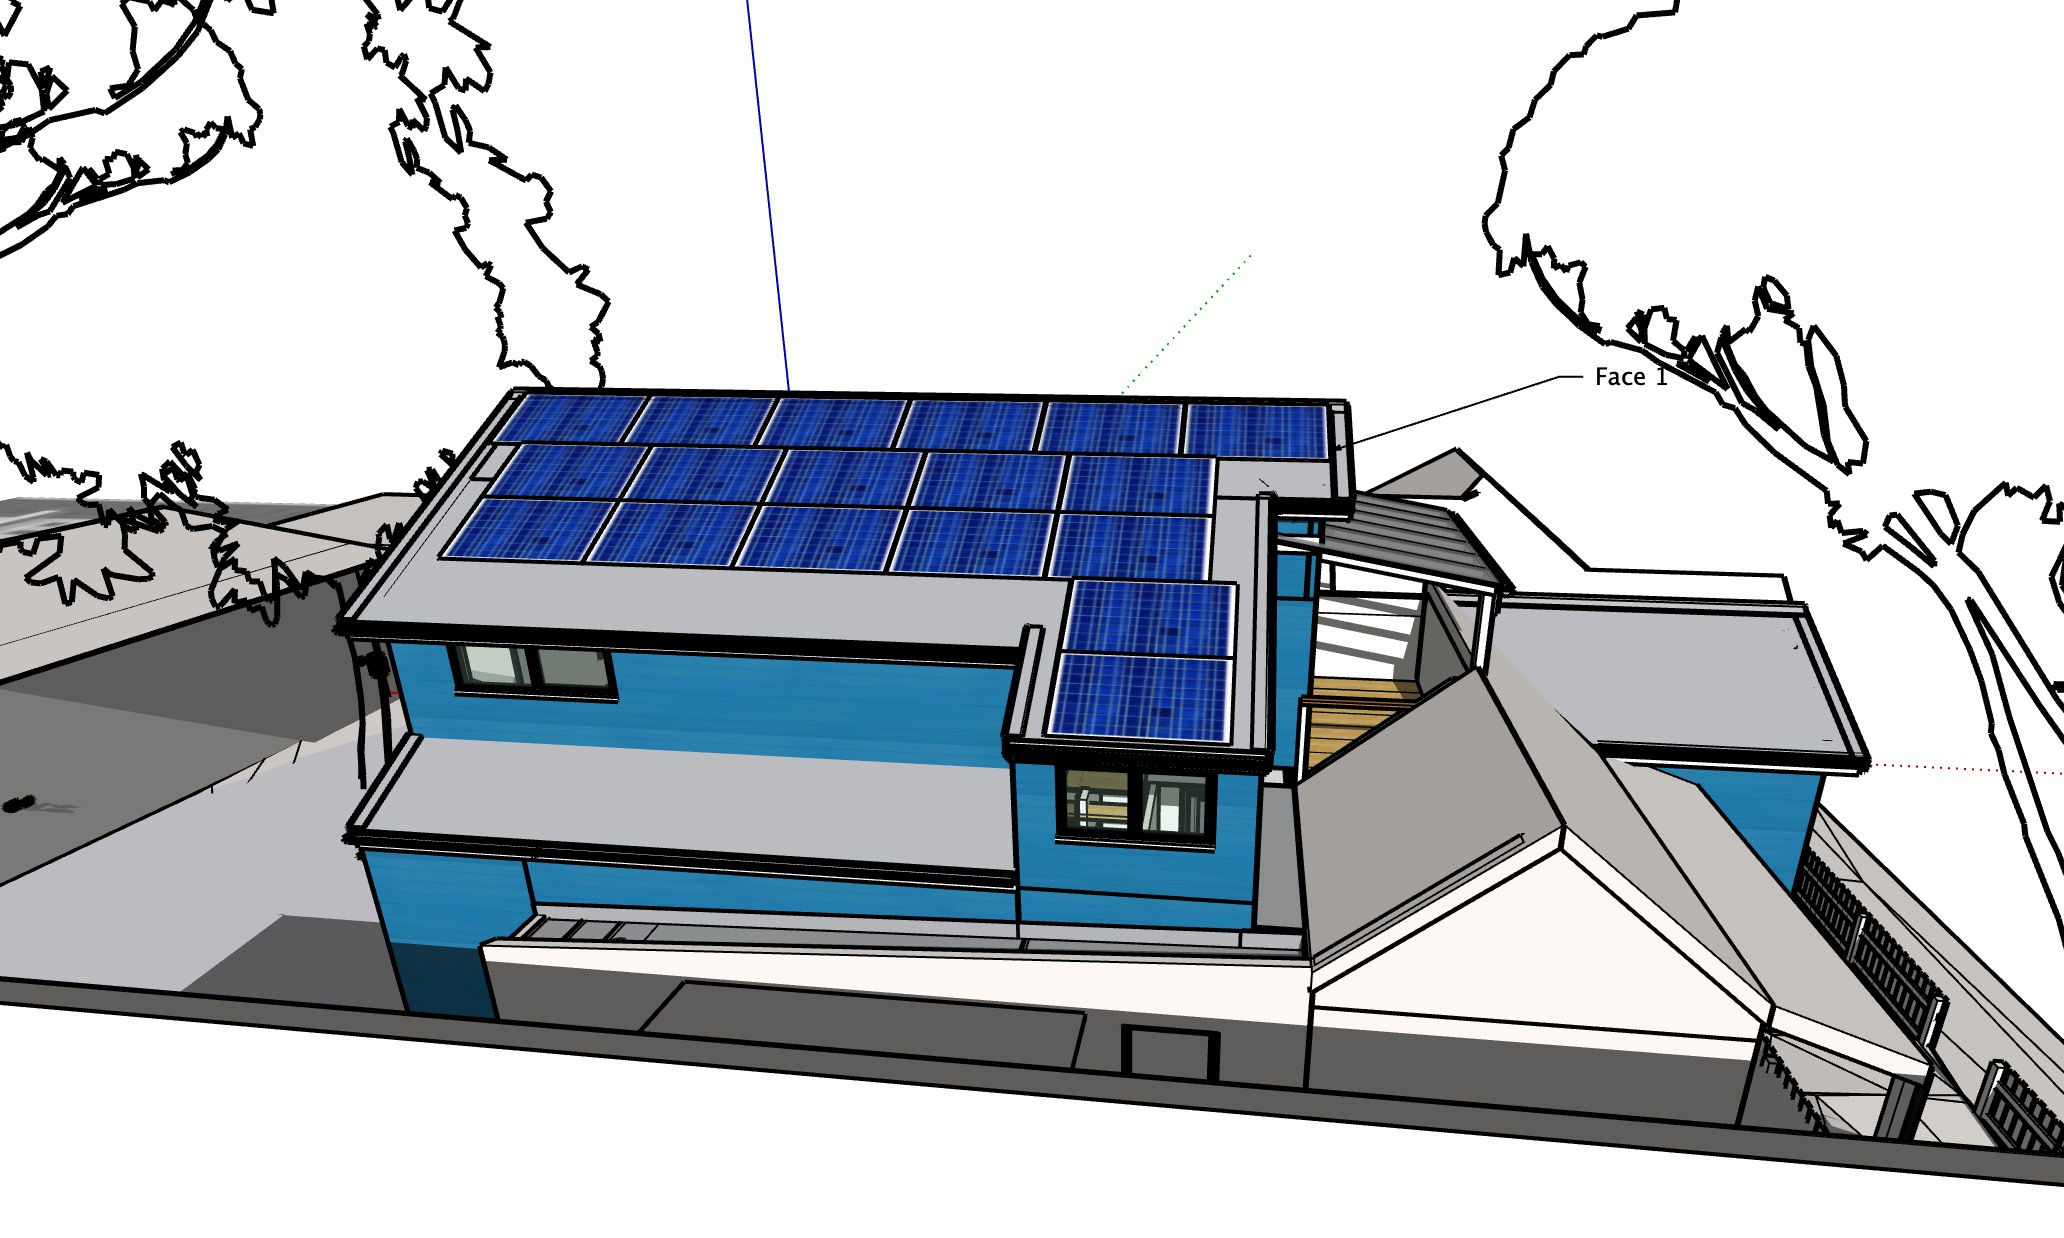 Sketchup house model with solar panels